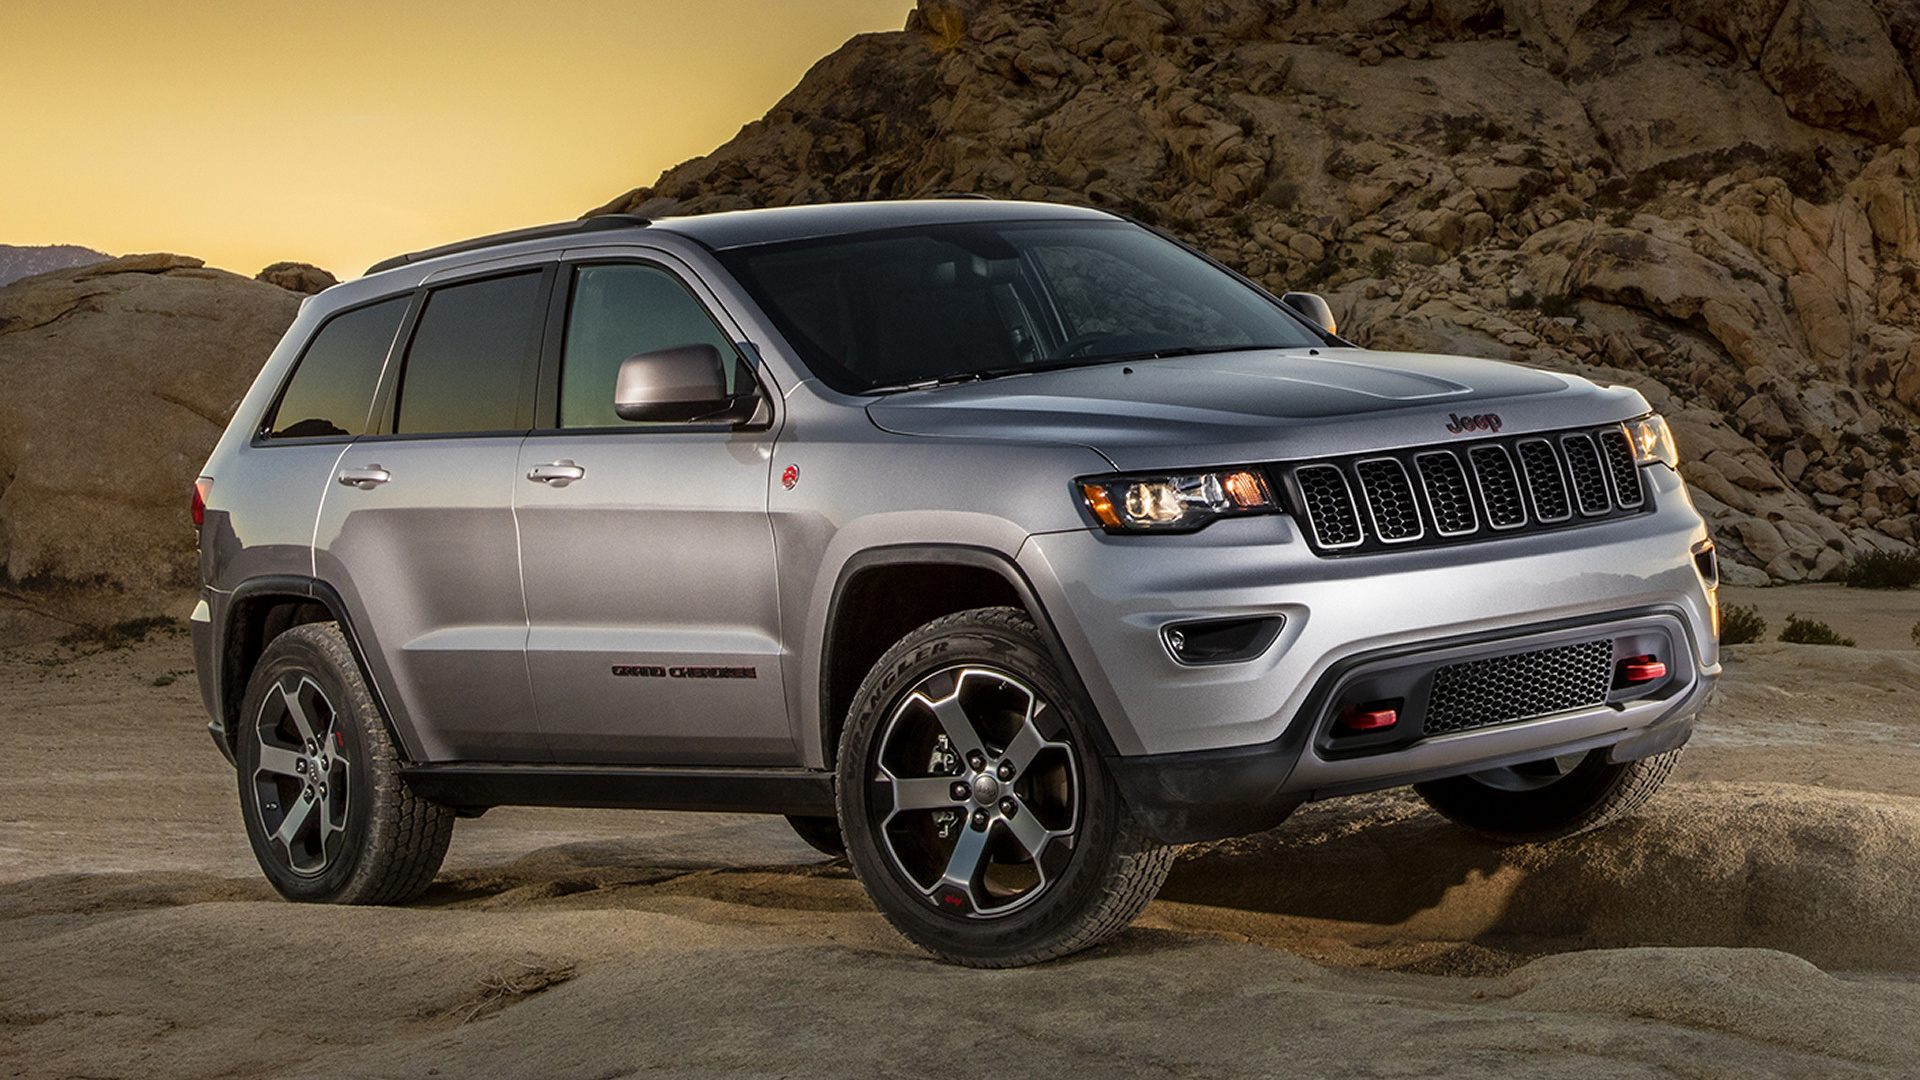 Jeep Grand Cherokee Wallpapers Images Photos Pictures Backgrounds 2005 Jeep Grand Cherokee 5.7 Hemi Transmission Fluid